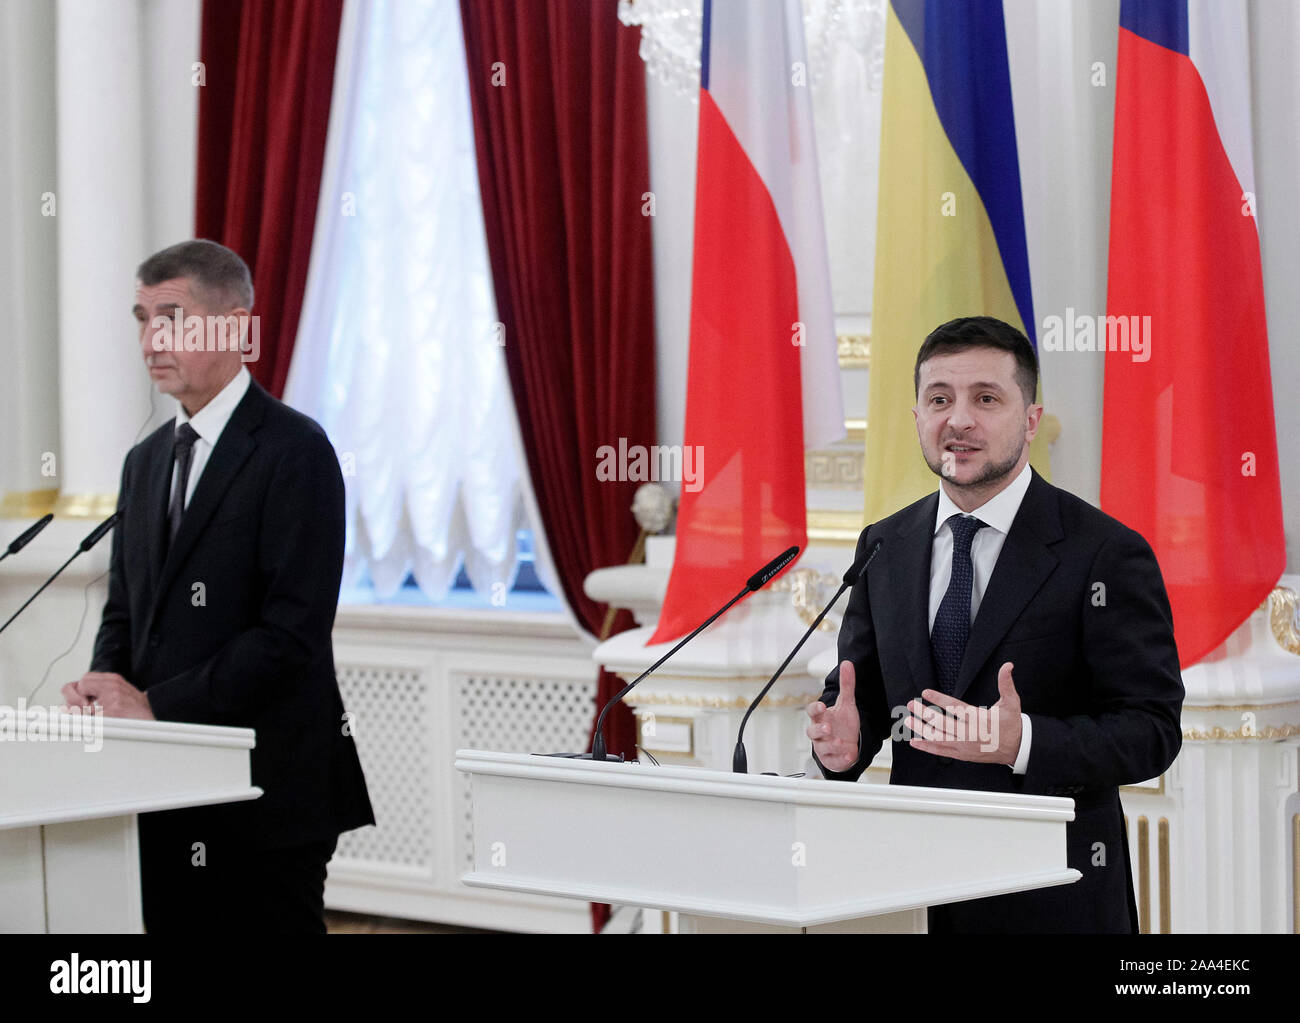 Czech Prime Minister, Andrej Babis (L) and Ukrainian President, Volodymyr Zelensky (R) during a media conference after their meeting.The Prime Minister of the Czech Republic Andrej Babis meets with Ukrainian top officials during his official visit to Ukraine. Stock Photo